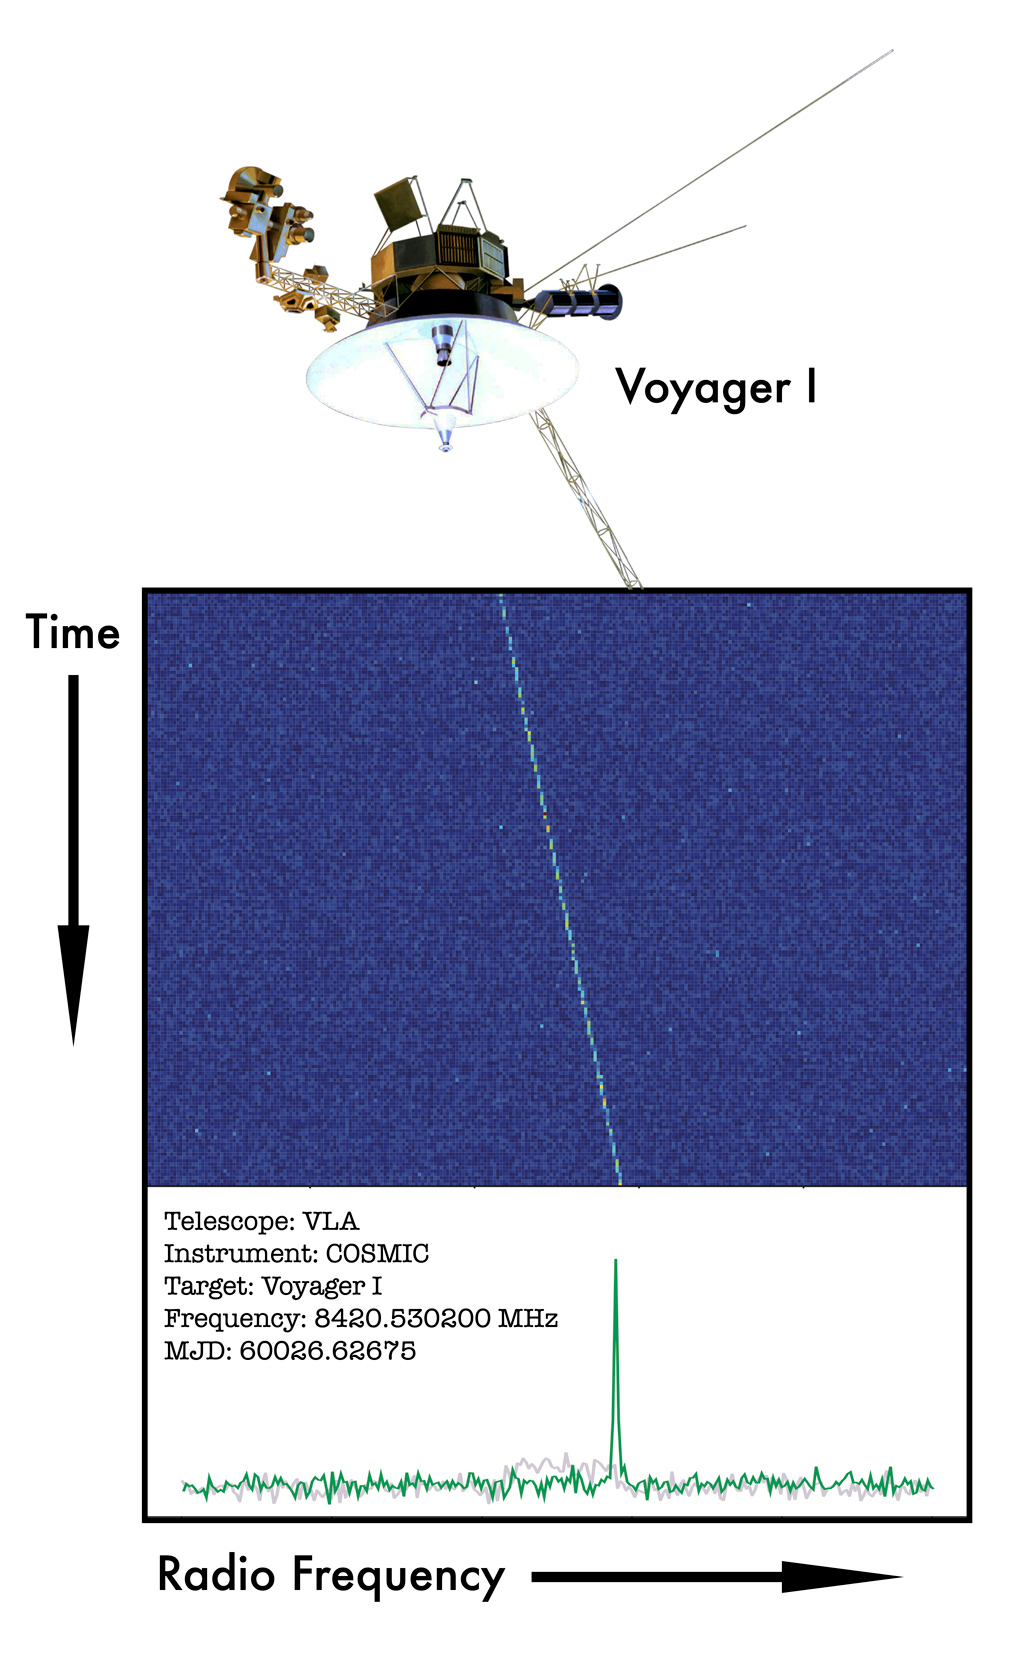 The detection of the Voyager I spacecraft using the COSMIC instrument on the VLA. Launched in 1977,